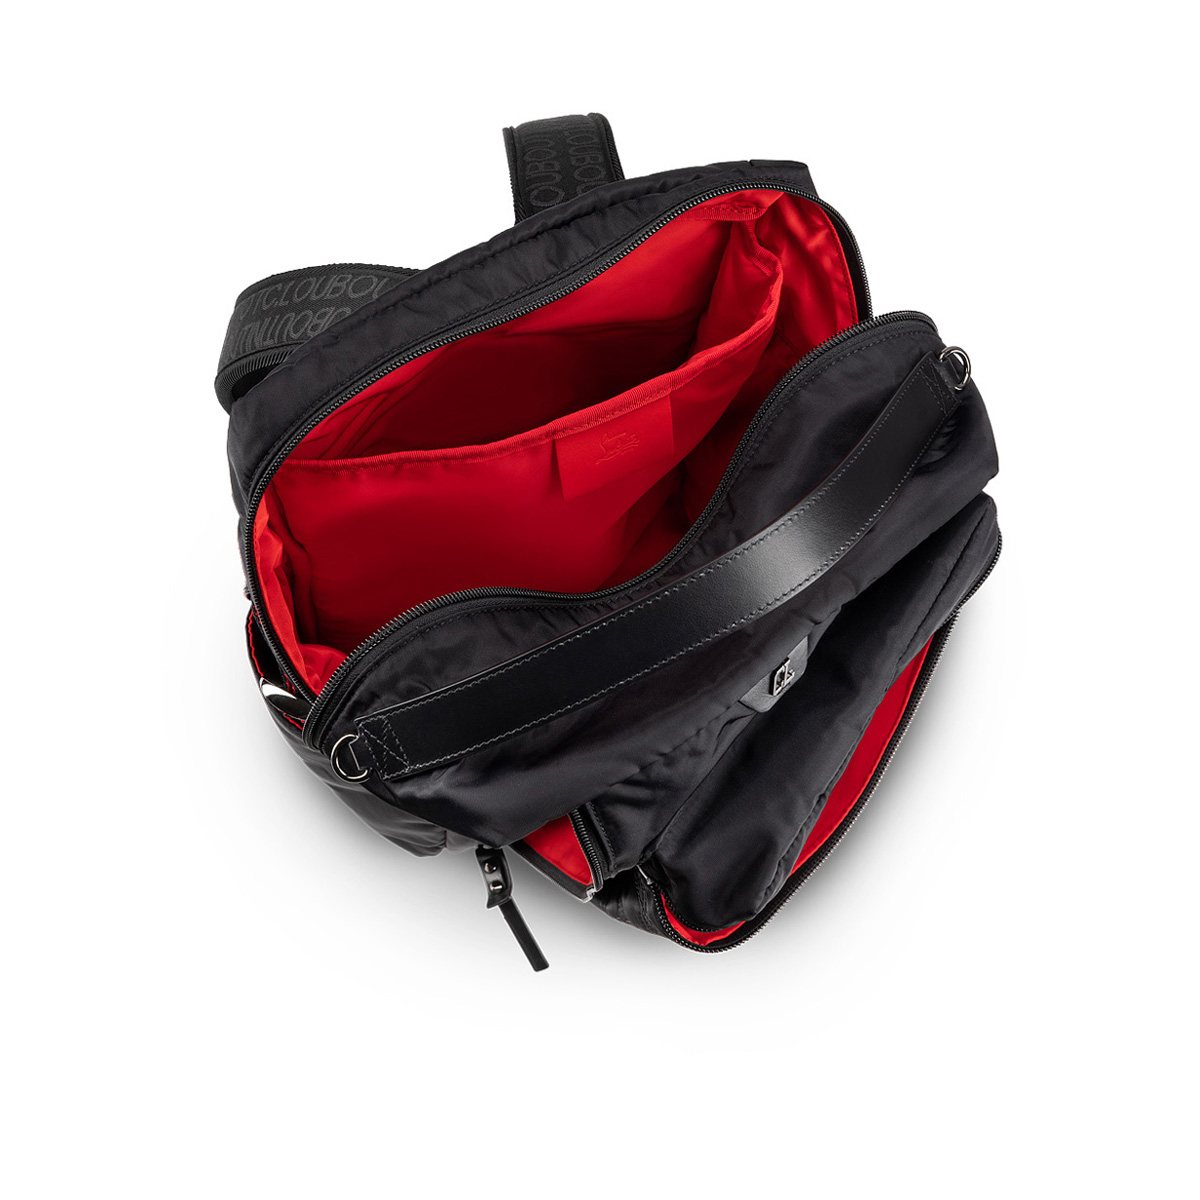 Christian Louboutin Loubideal Backpack in Red for Men